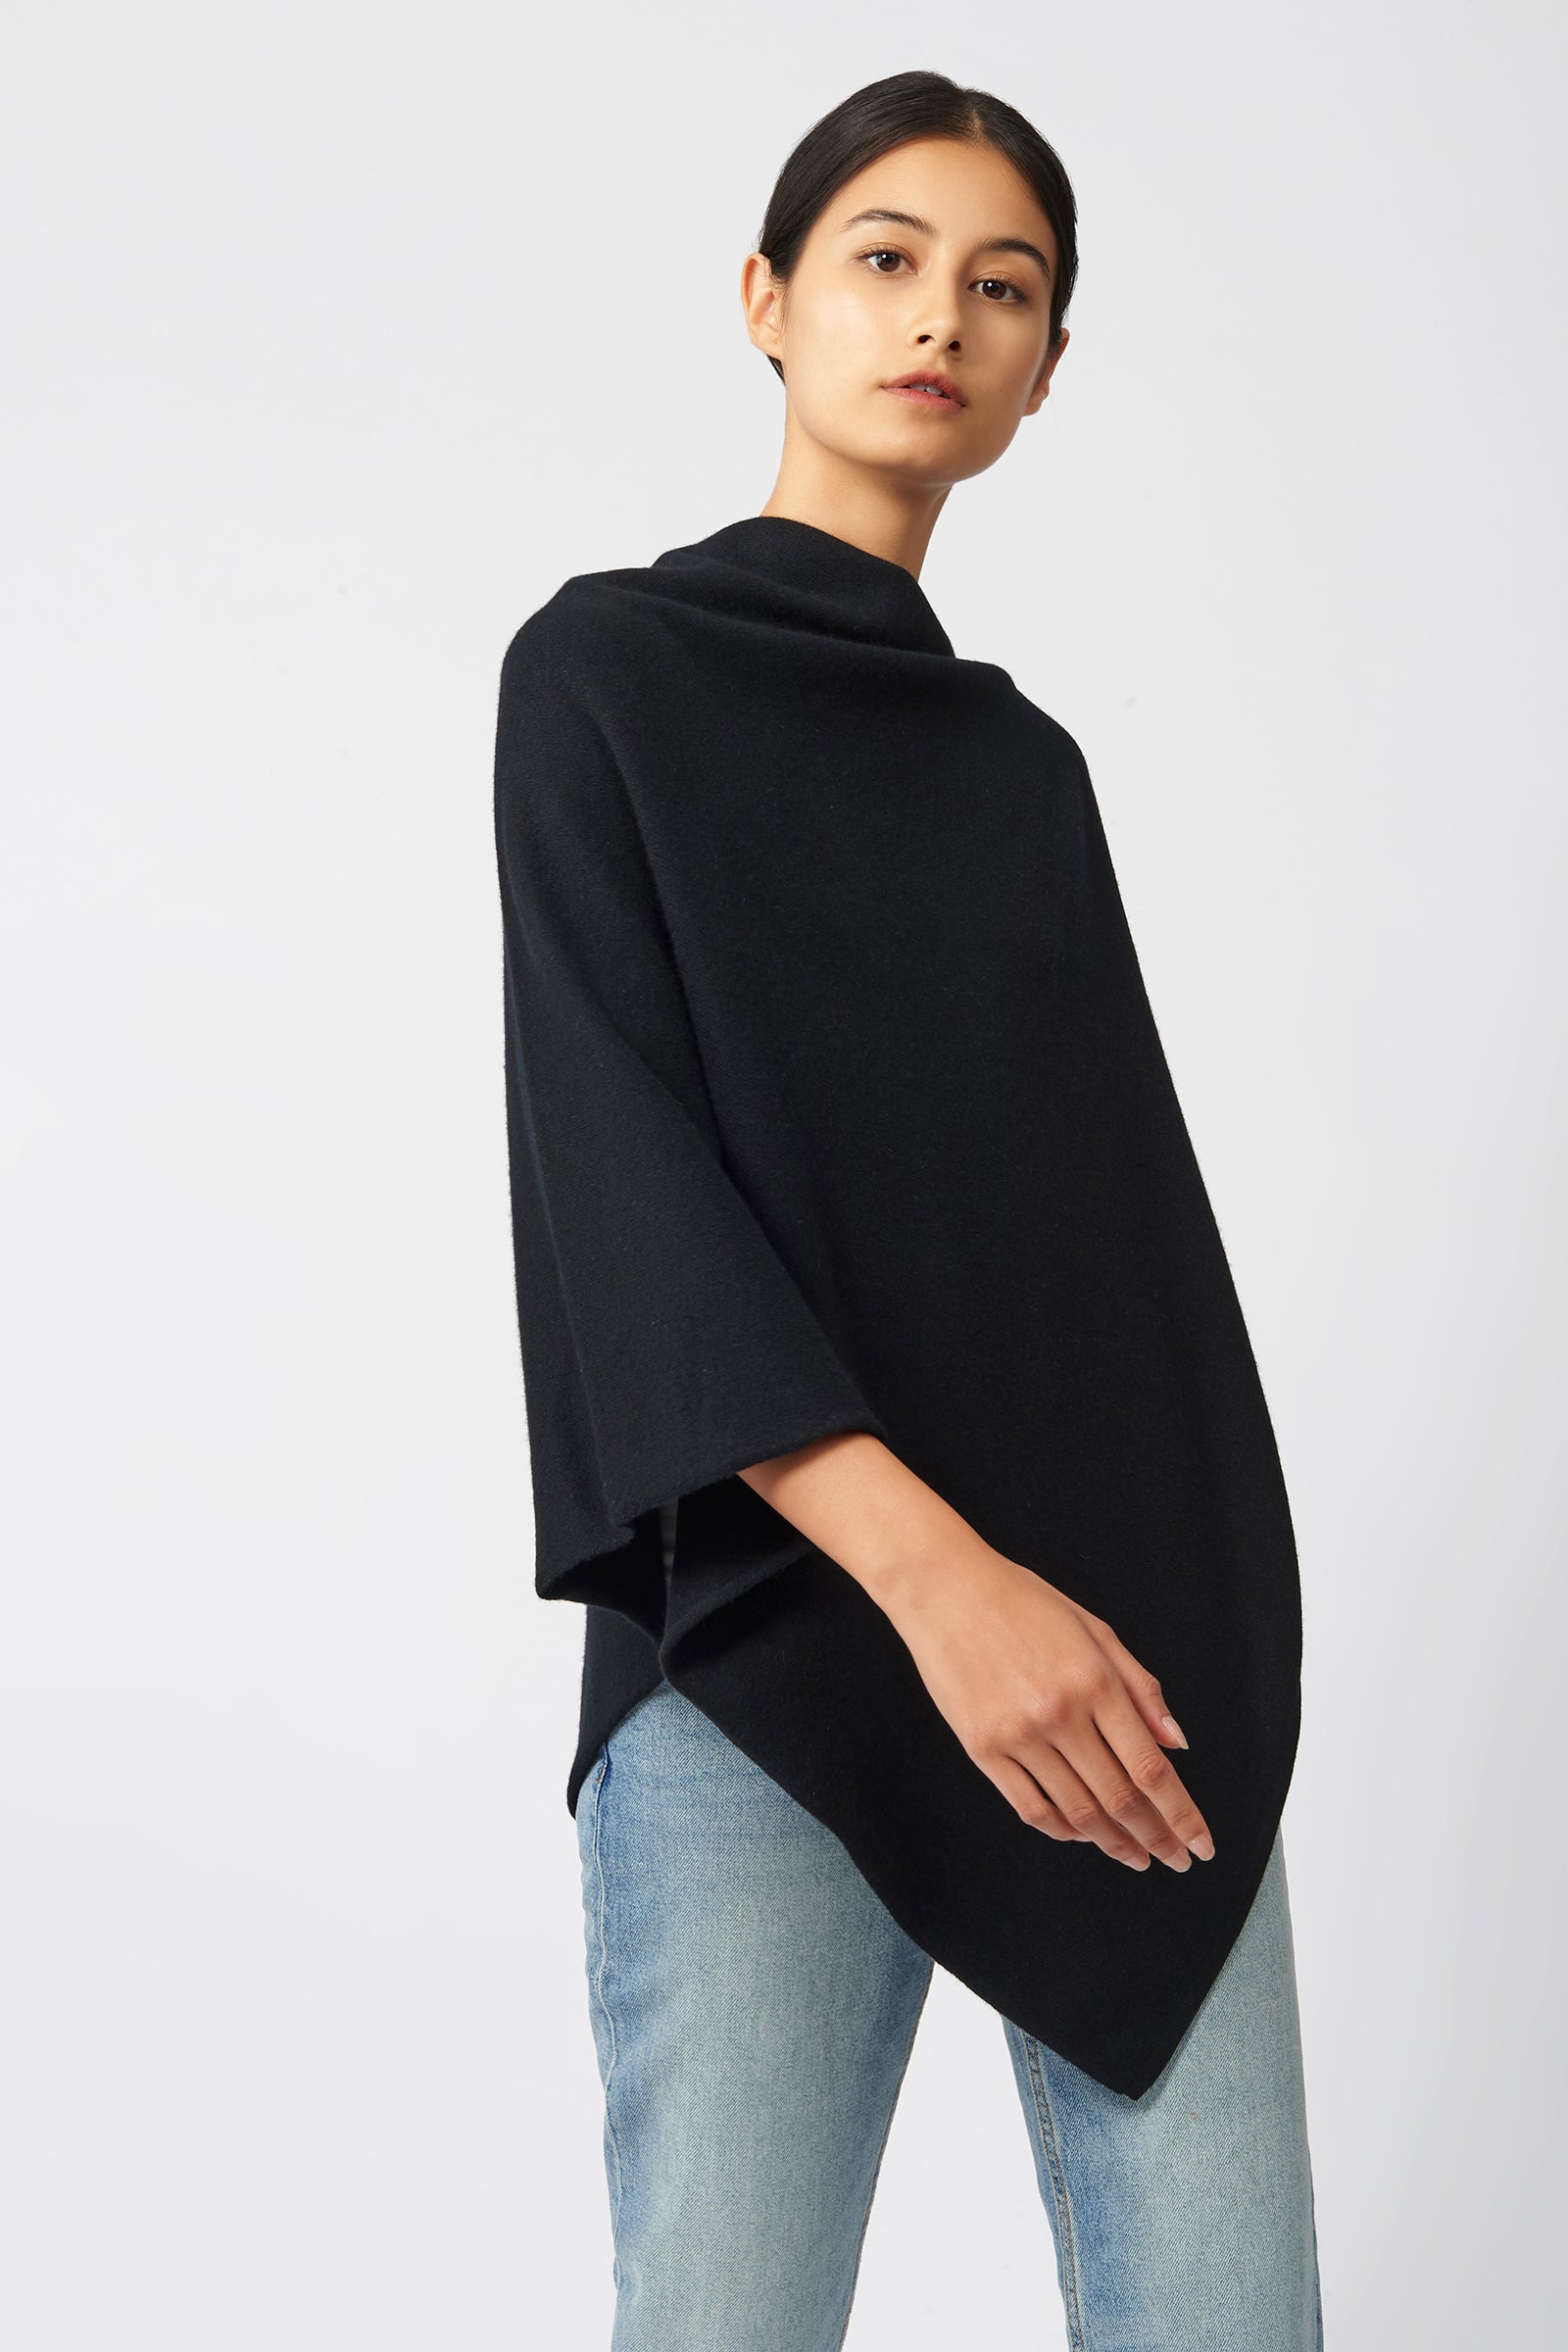 Cashmere Poncho in Black Made From 100% Cashmere – KAL RIEMAN